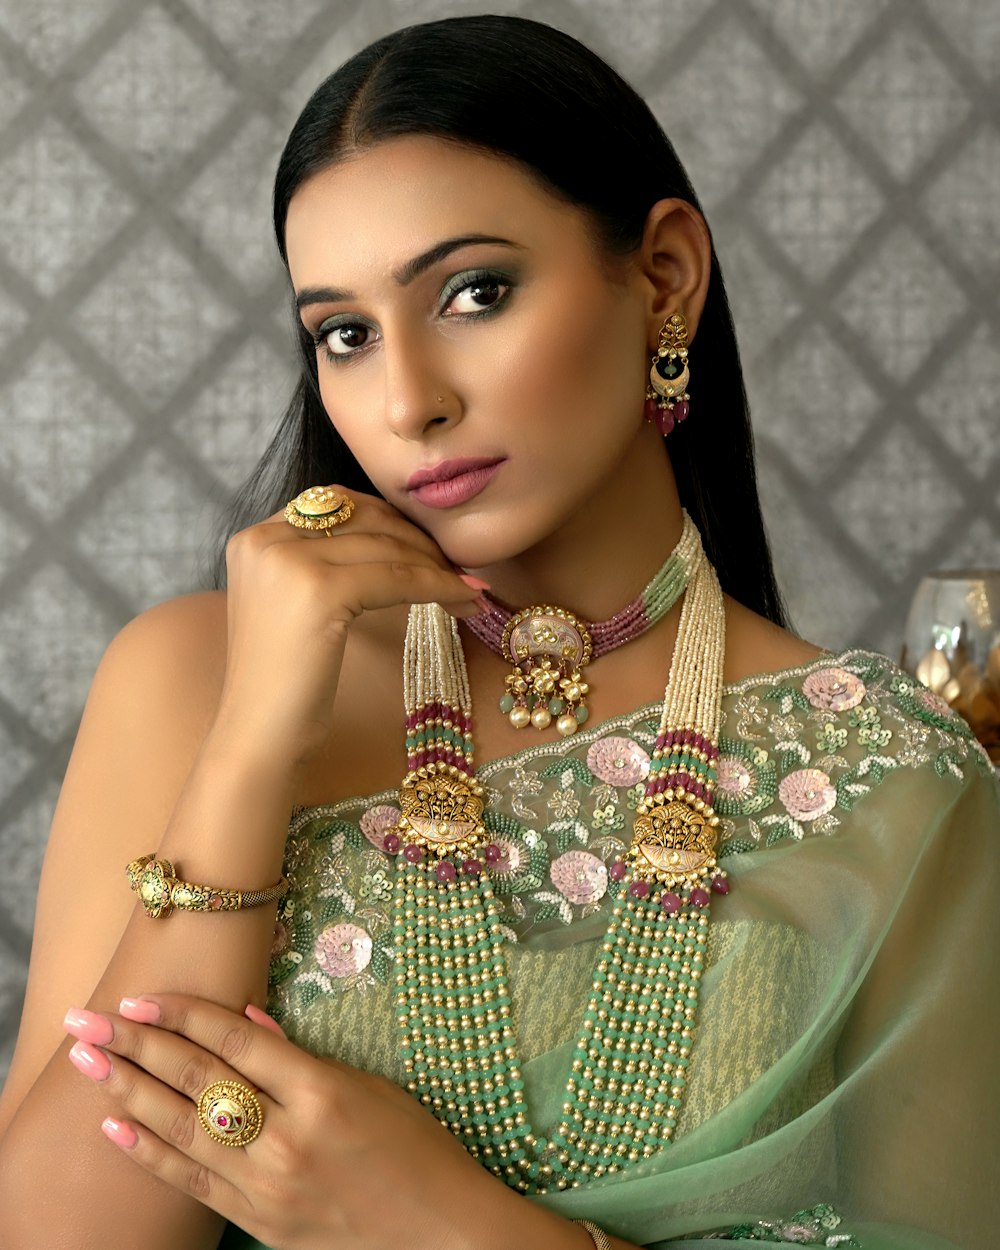 a woman wearing a green sari and jewelry